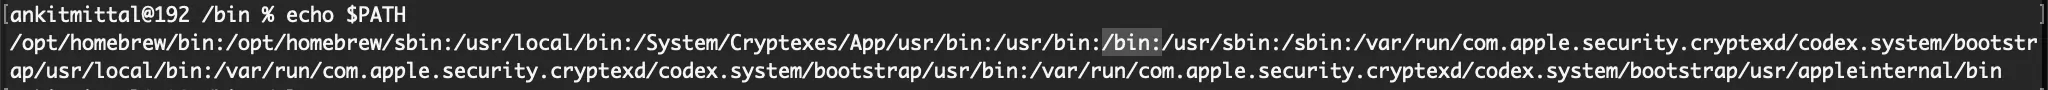 echo $path command with /bin highlighted